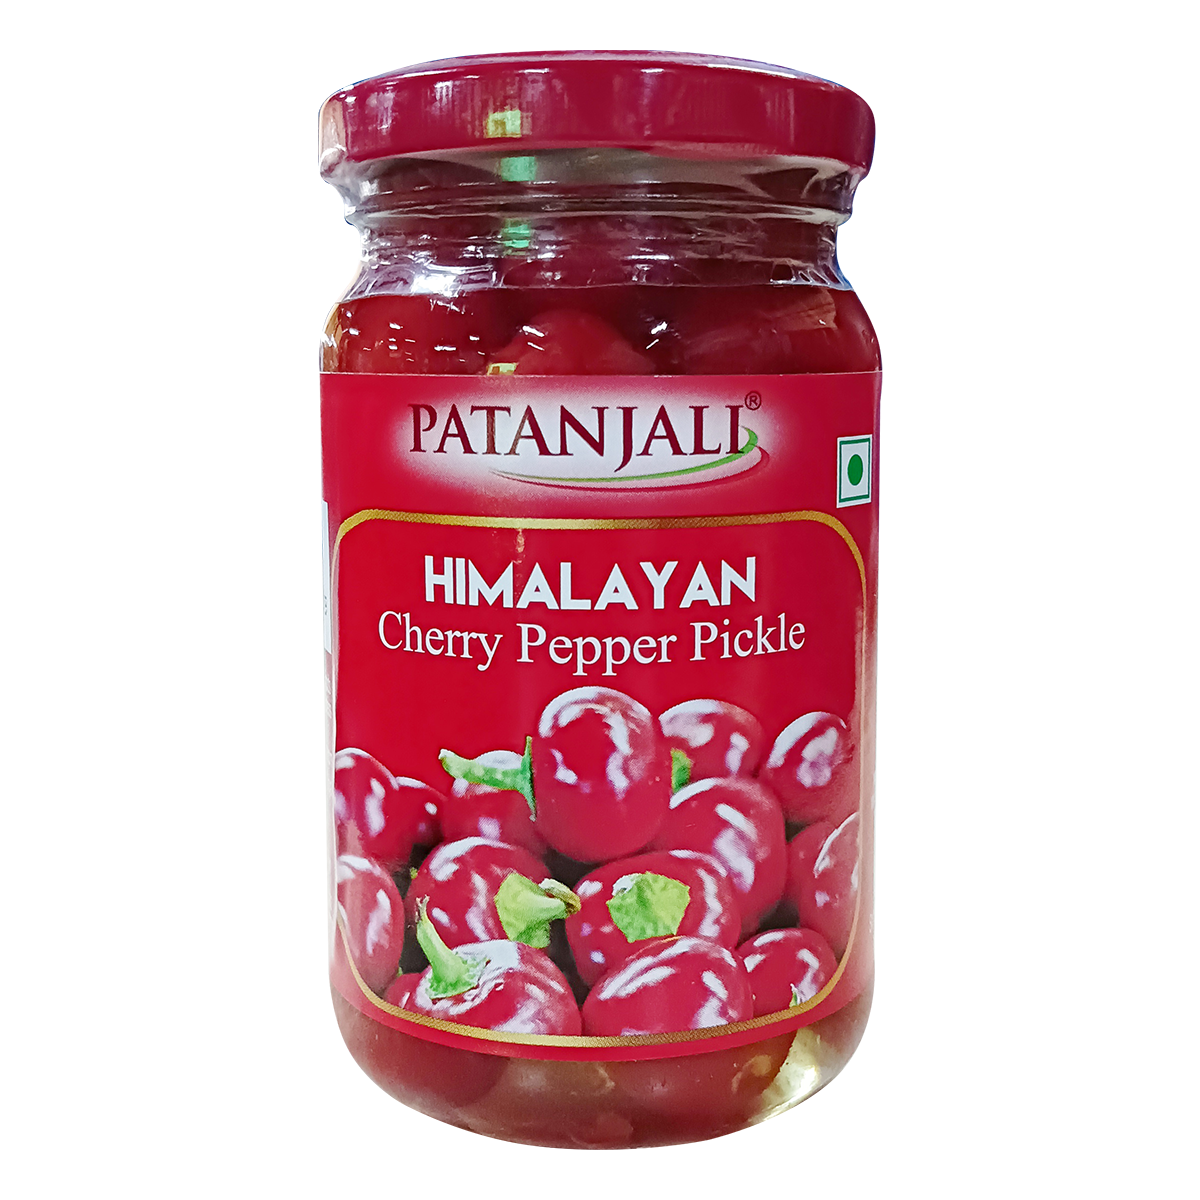 1692416523HimalayanCherryPepperPickle200g1.png